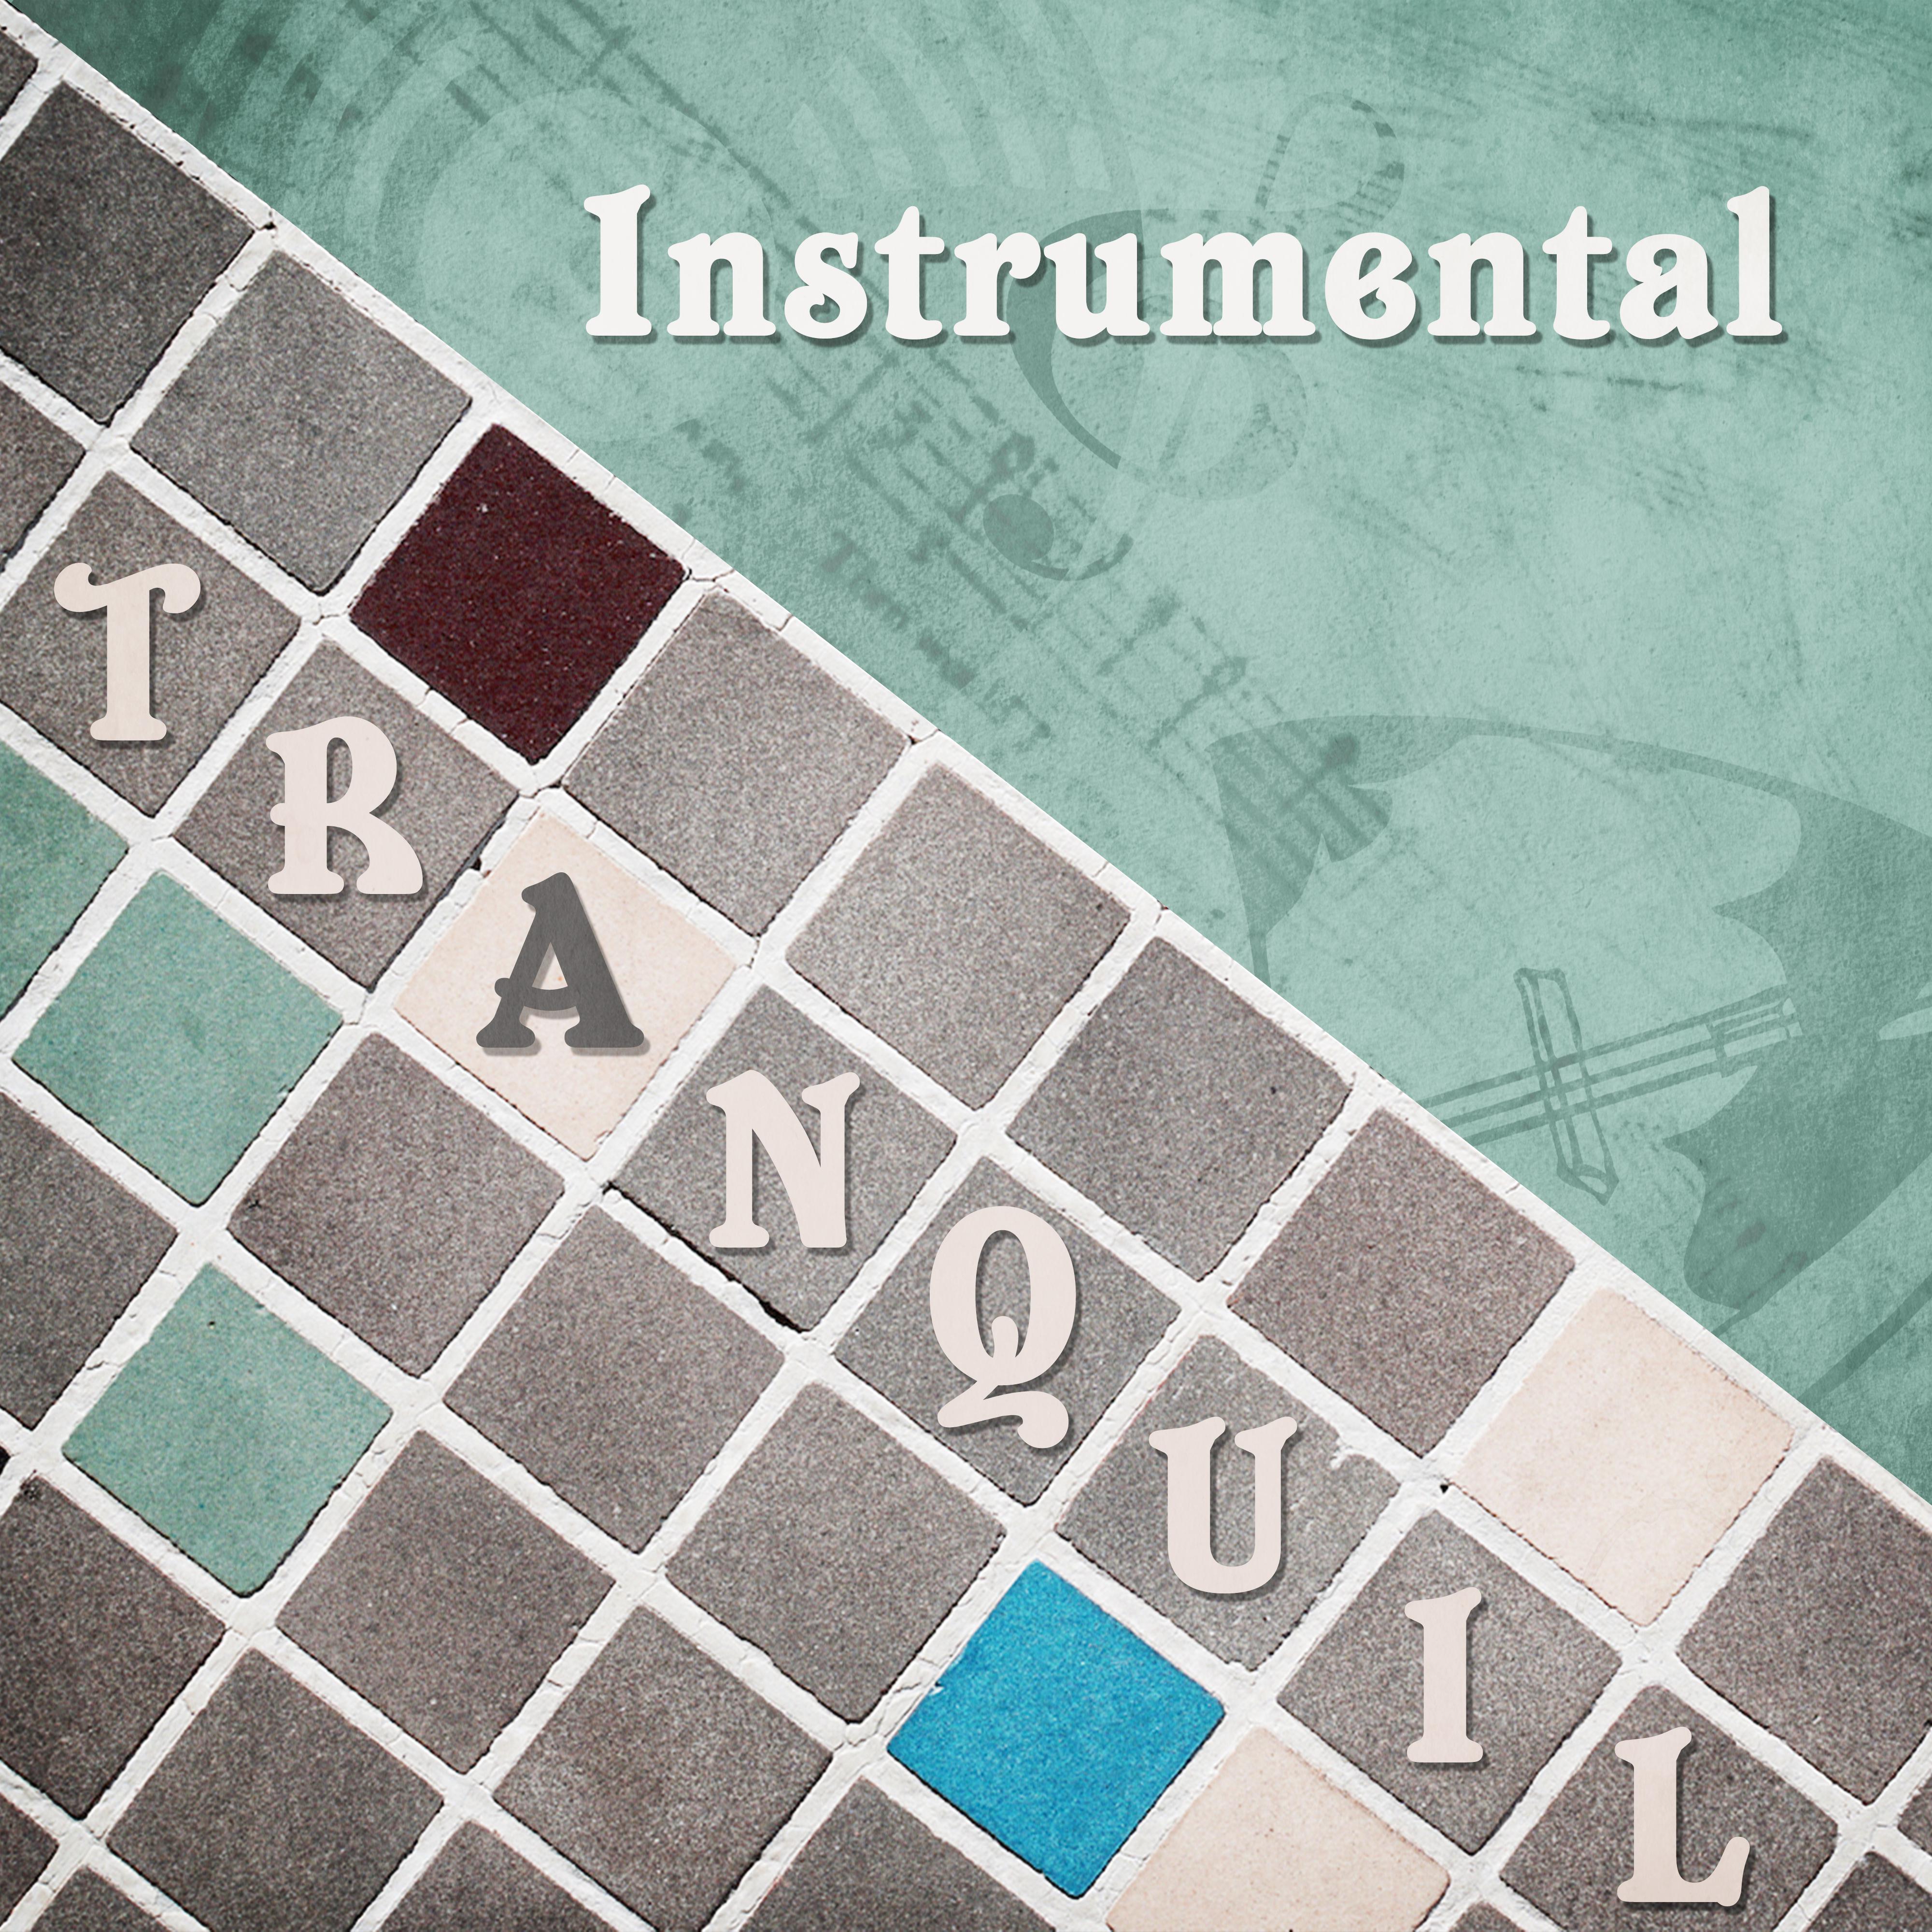 Instrumental Tranquil  Smooth Jazz for Relaxation, Healing Music, Soothing Sounds to Calm Down, Stress Relief, Chilled Jazz, Cafe Music